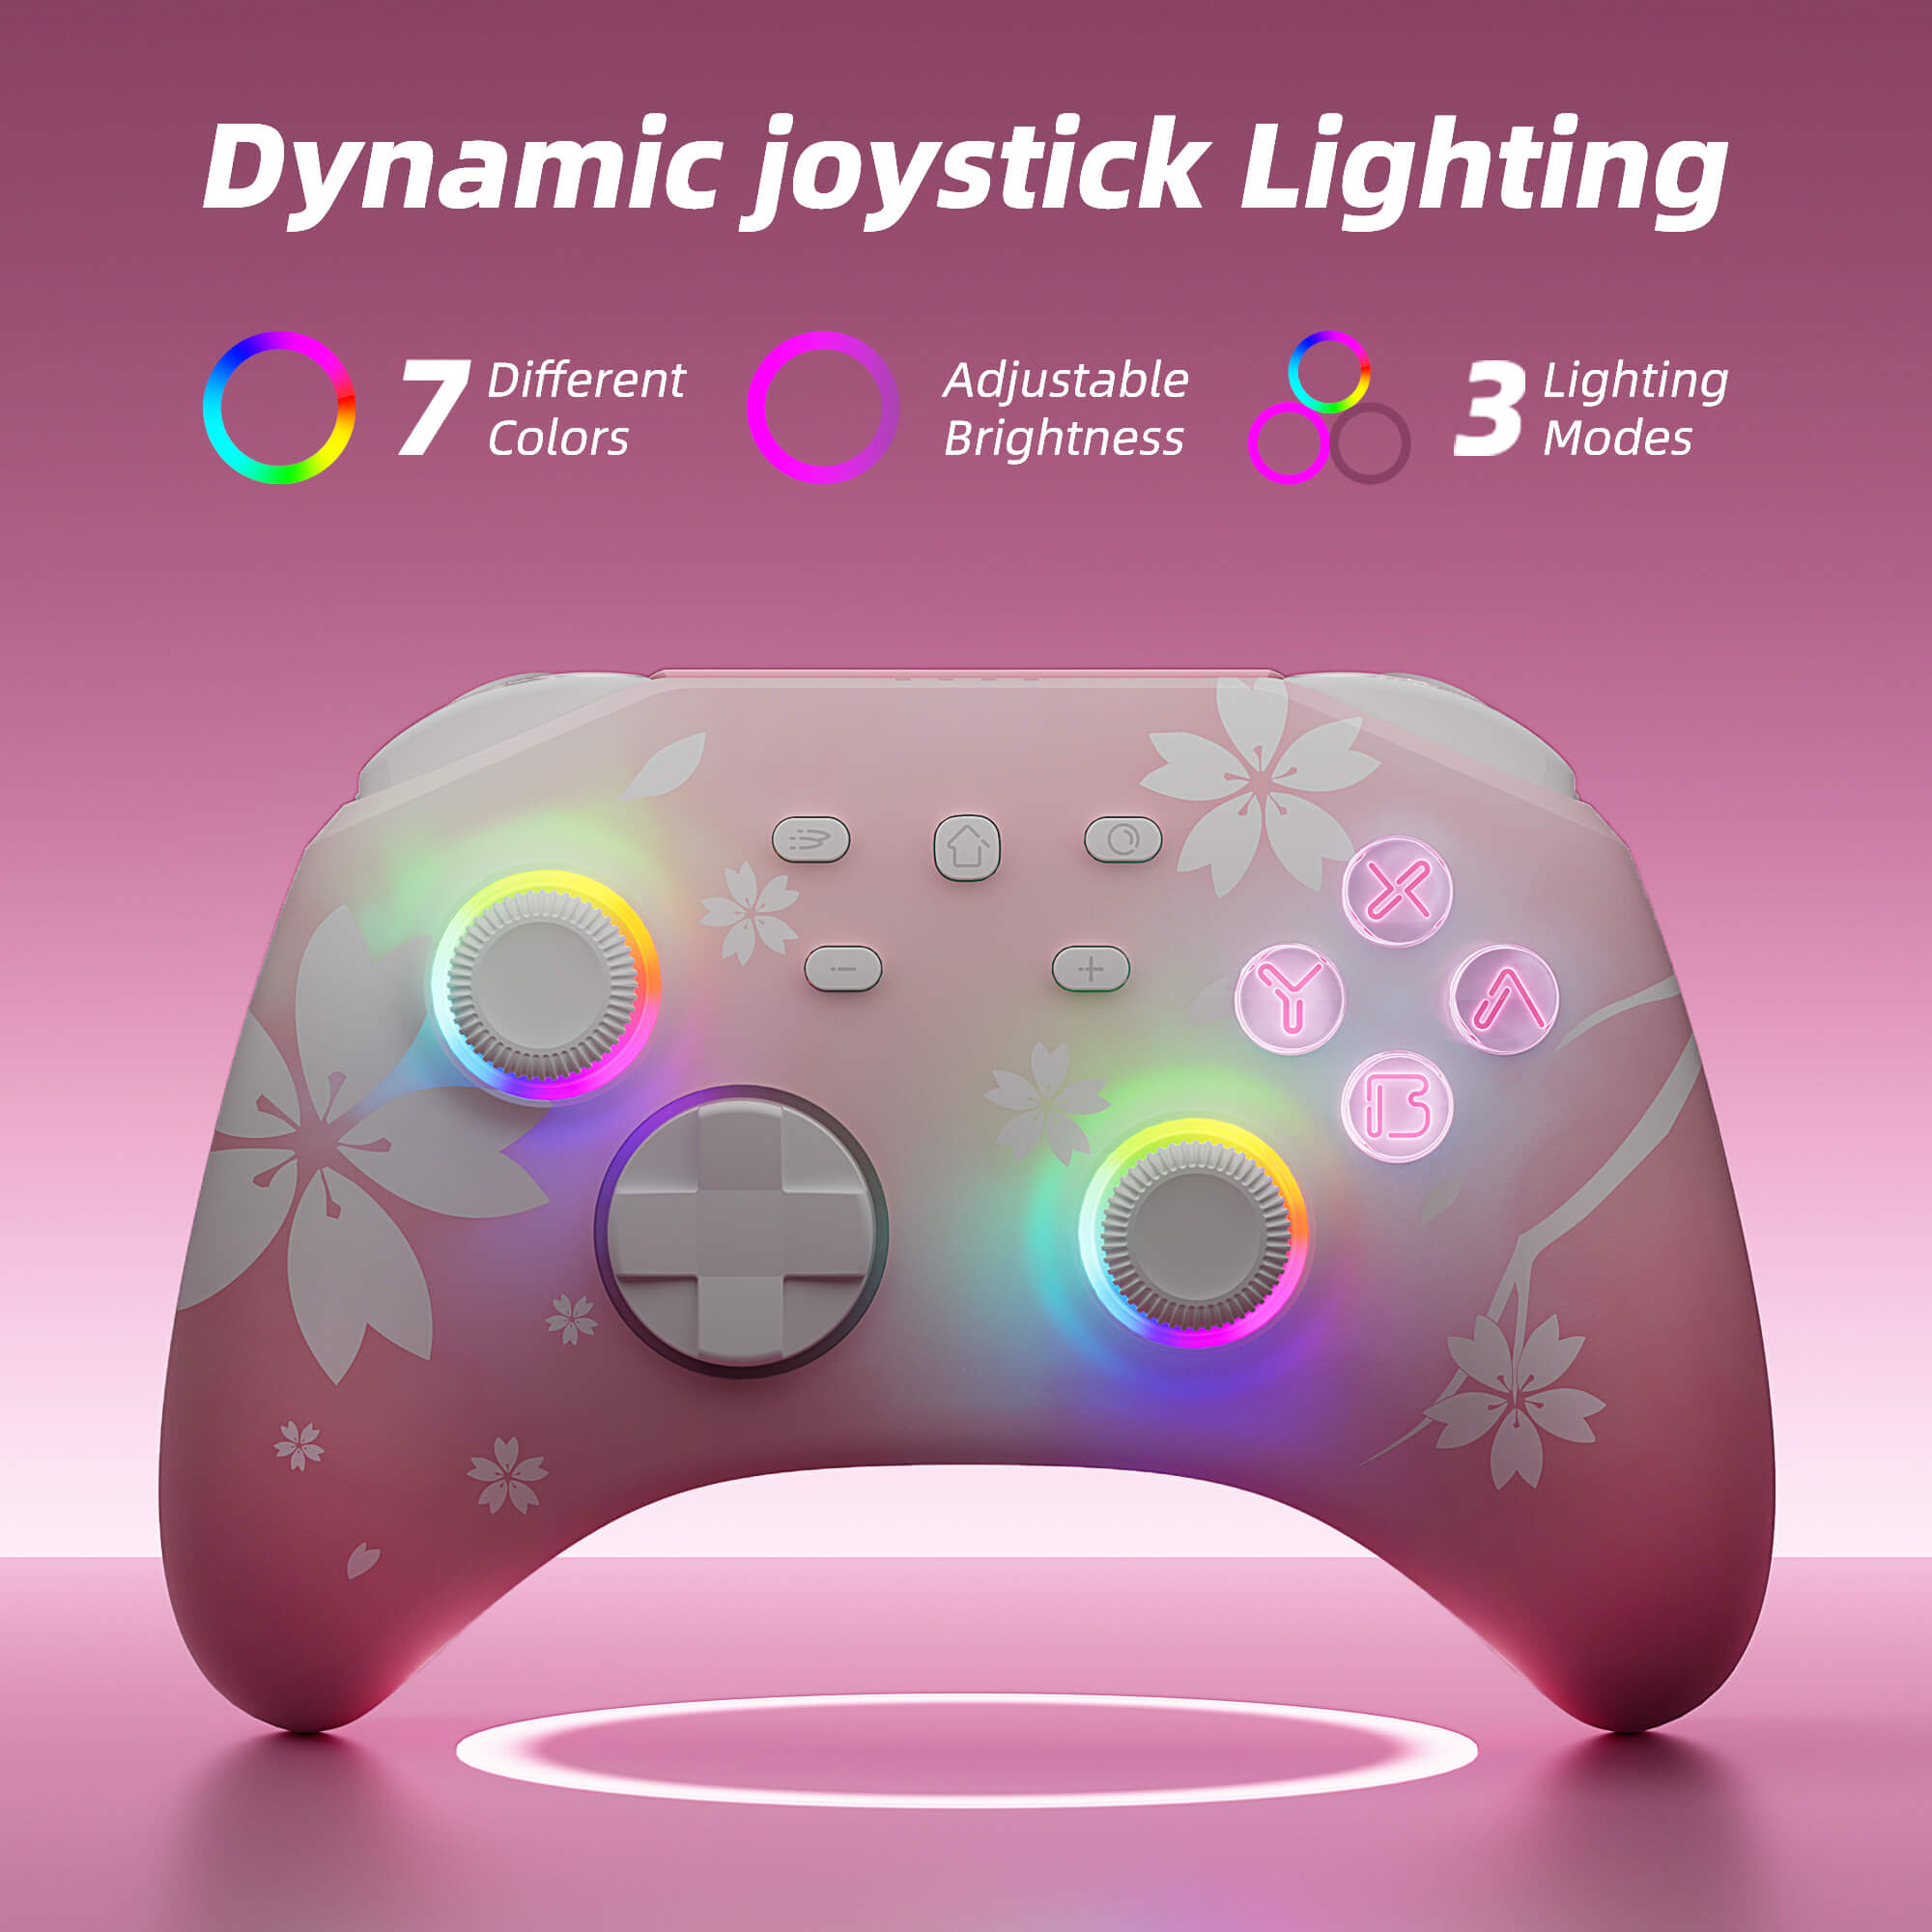 Mytrix Wireless Pro Controller Sakura Pink, Bluetooth Controller with Programmable